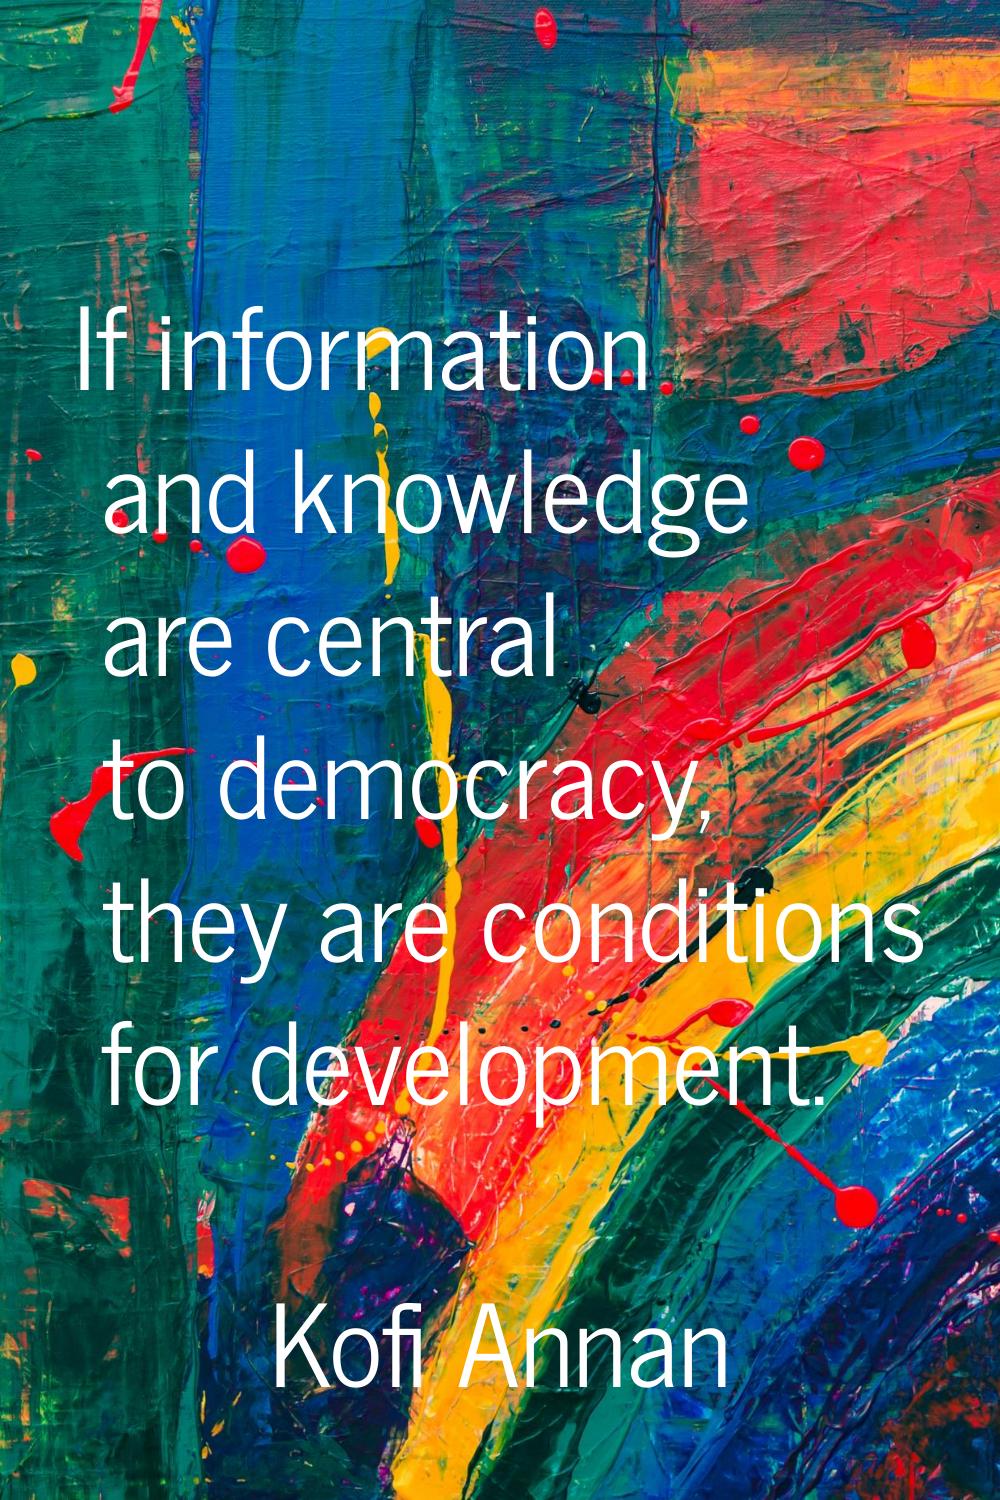 If information and knowledge are central to democracy, they are conditions for development.